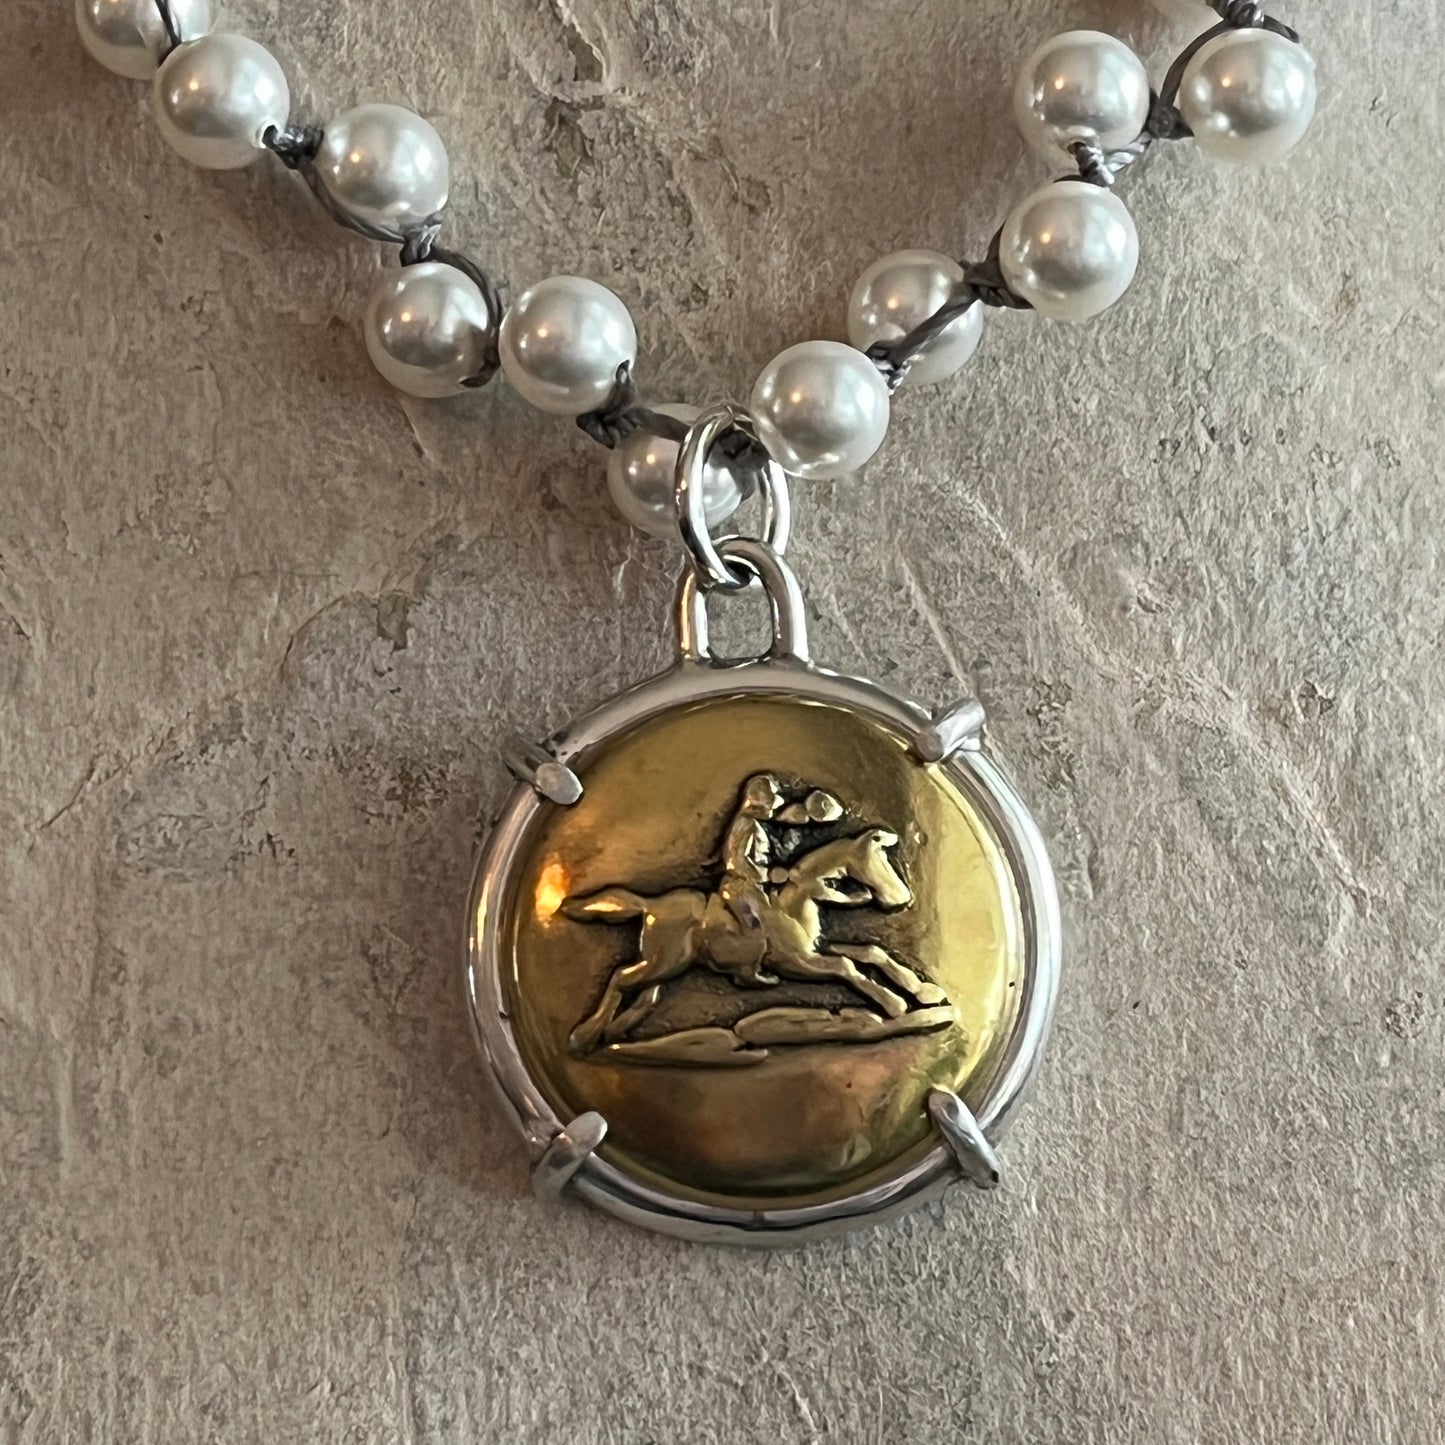 Vintage Brass Horse Button on Pearl Necklace